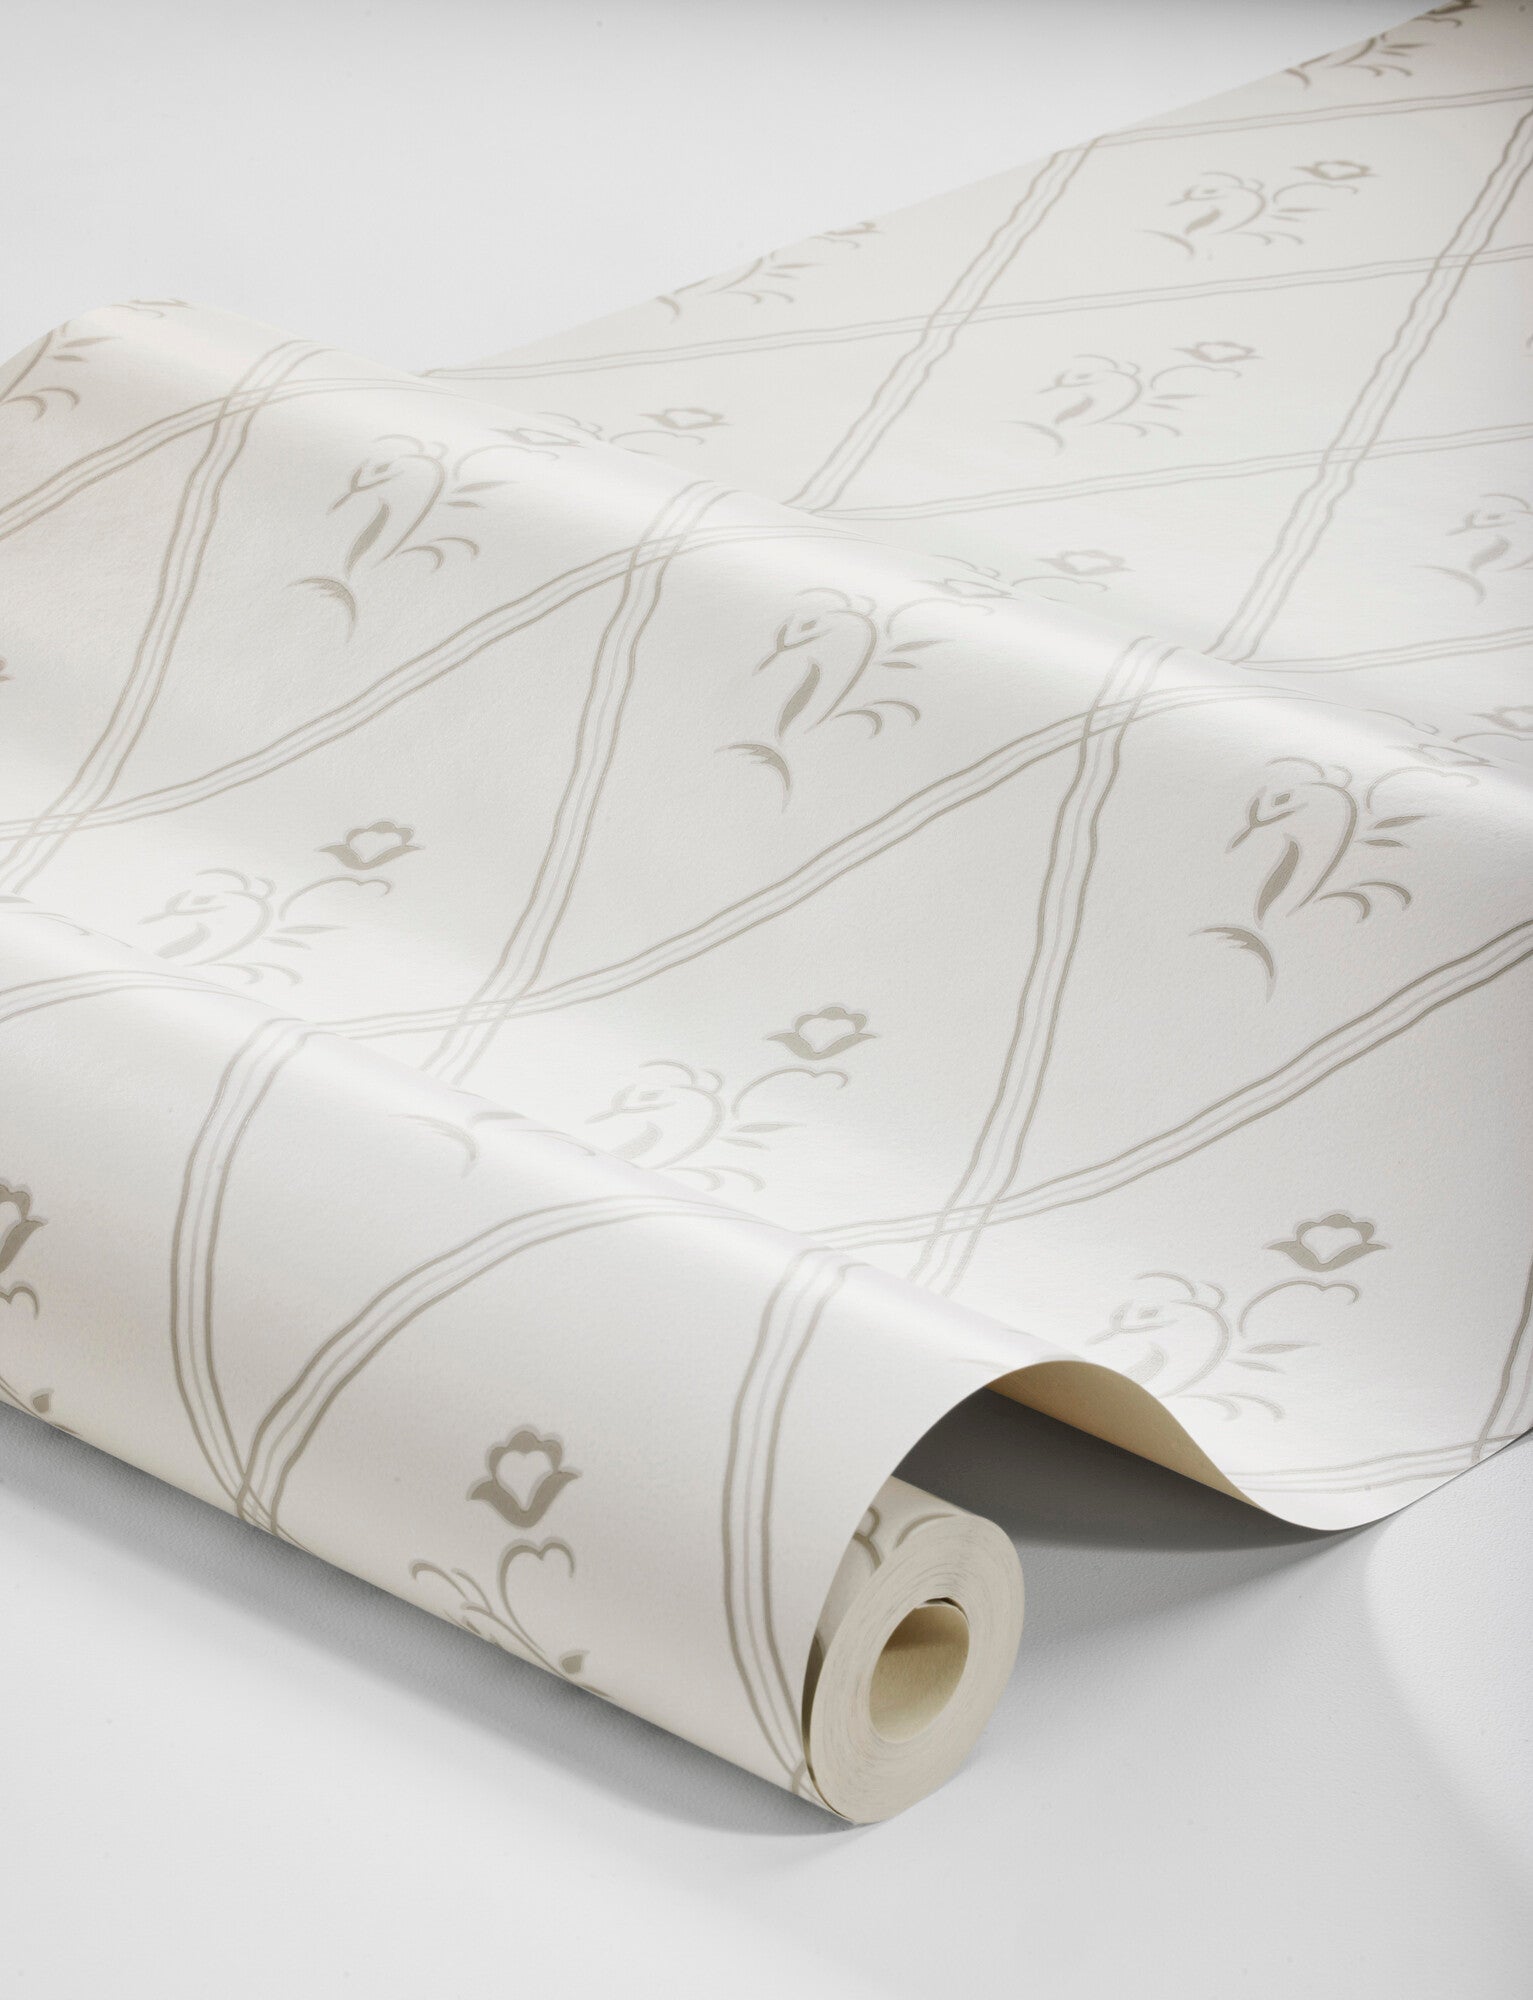 Classic and beautiful, our Signe wallpaper is colored in gray detailing on a white background.